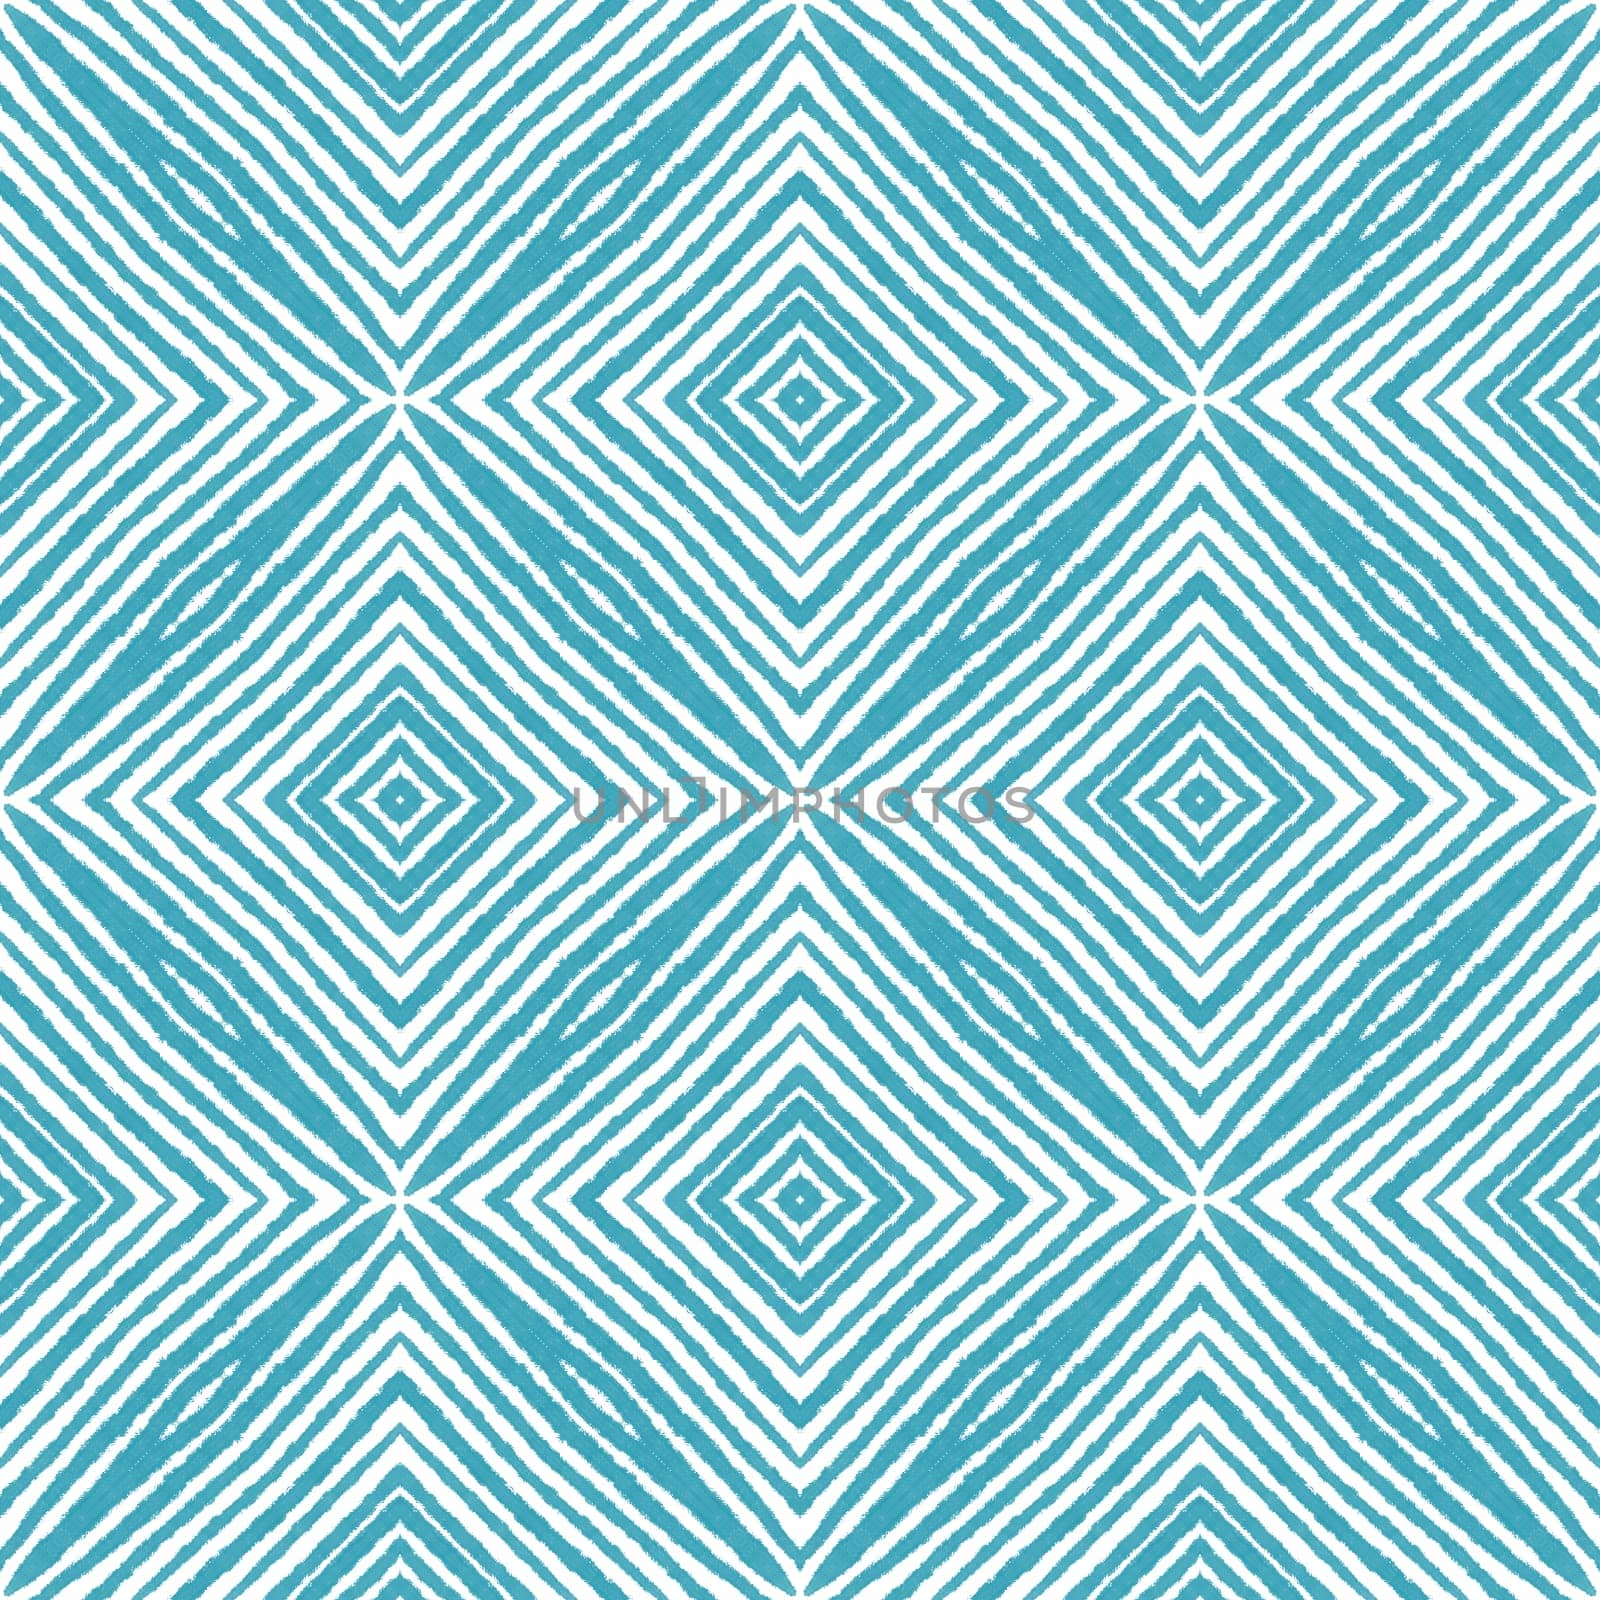 Striped hand drawn pattern. Turquoise symmetrical by beginagain